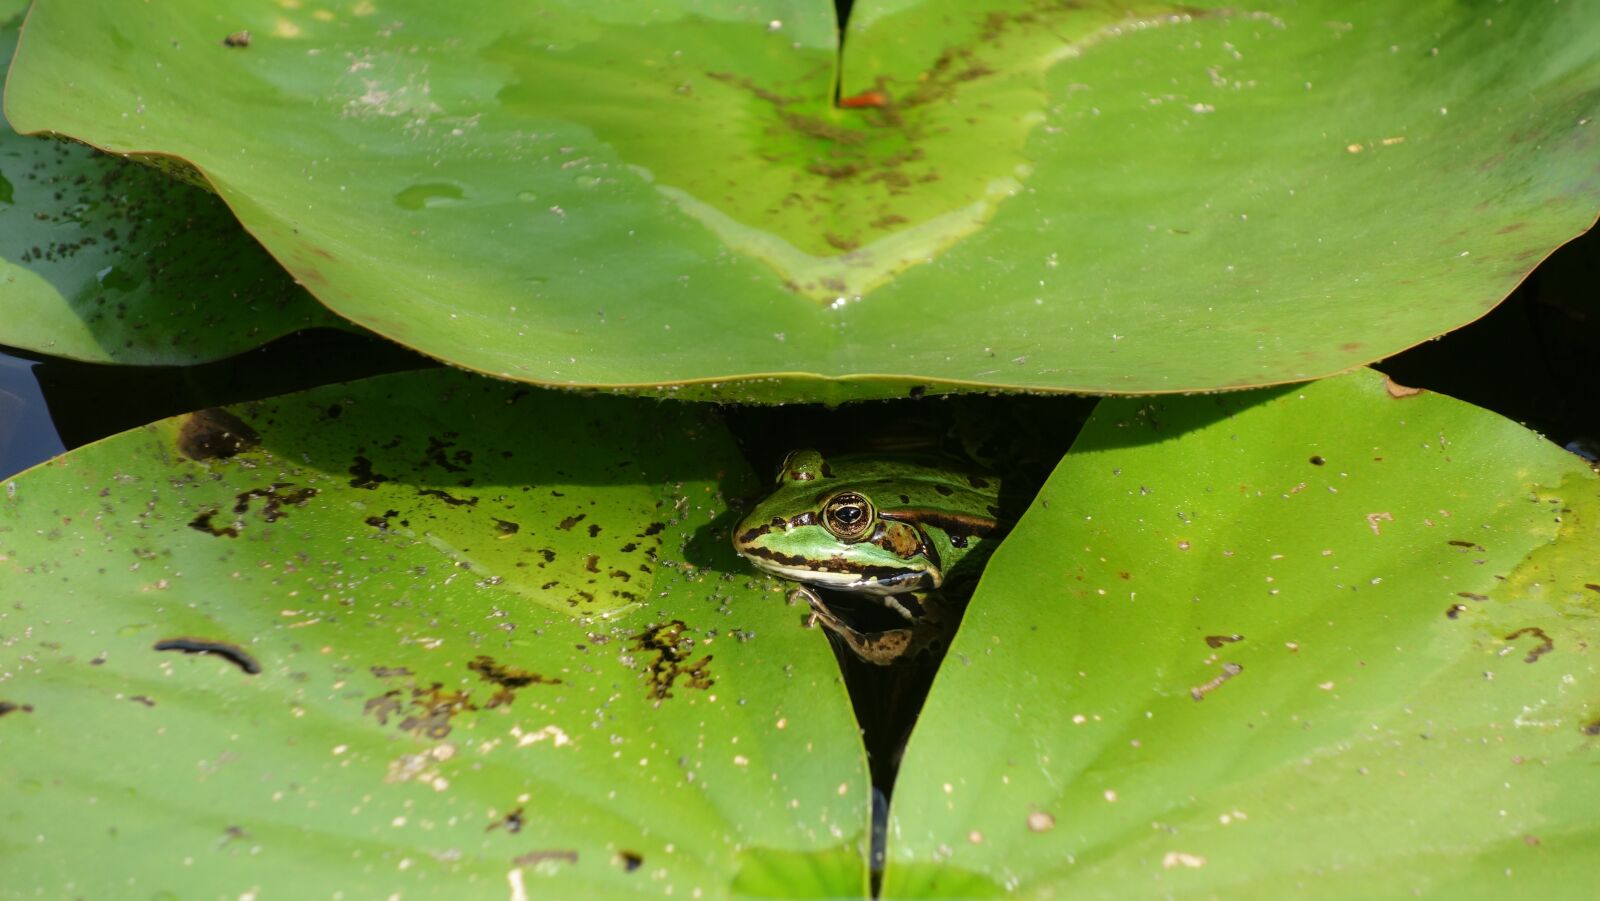 Sony Cyber-shot DSC-RX100 sample photo. Frog, amphibian, water lily photography